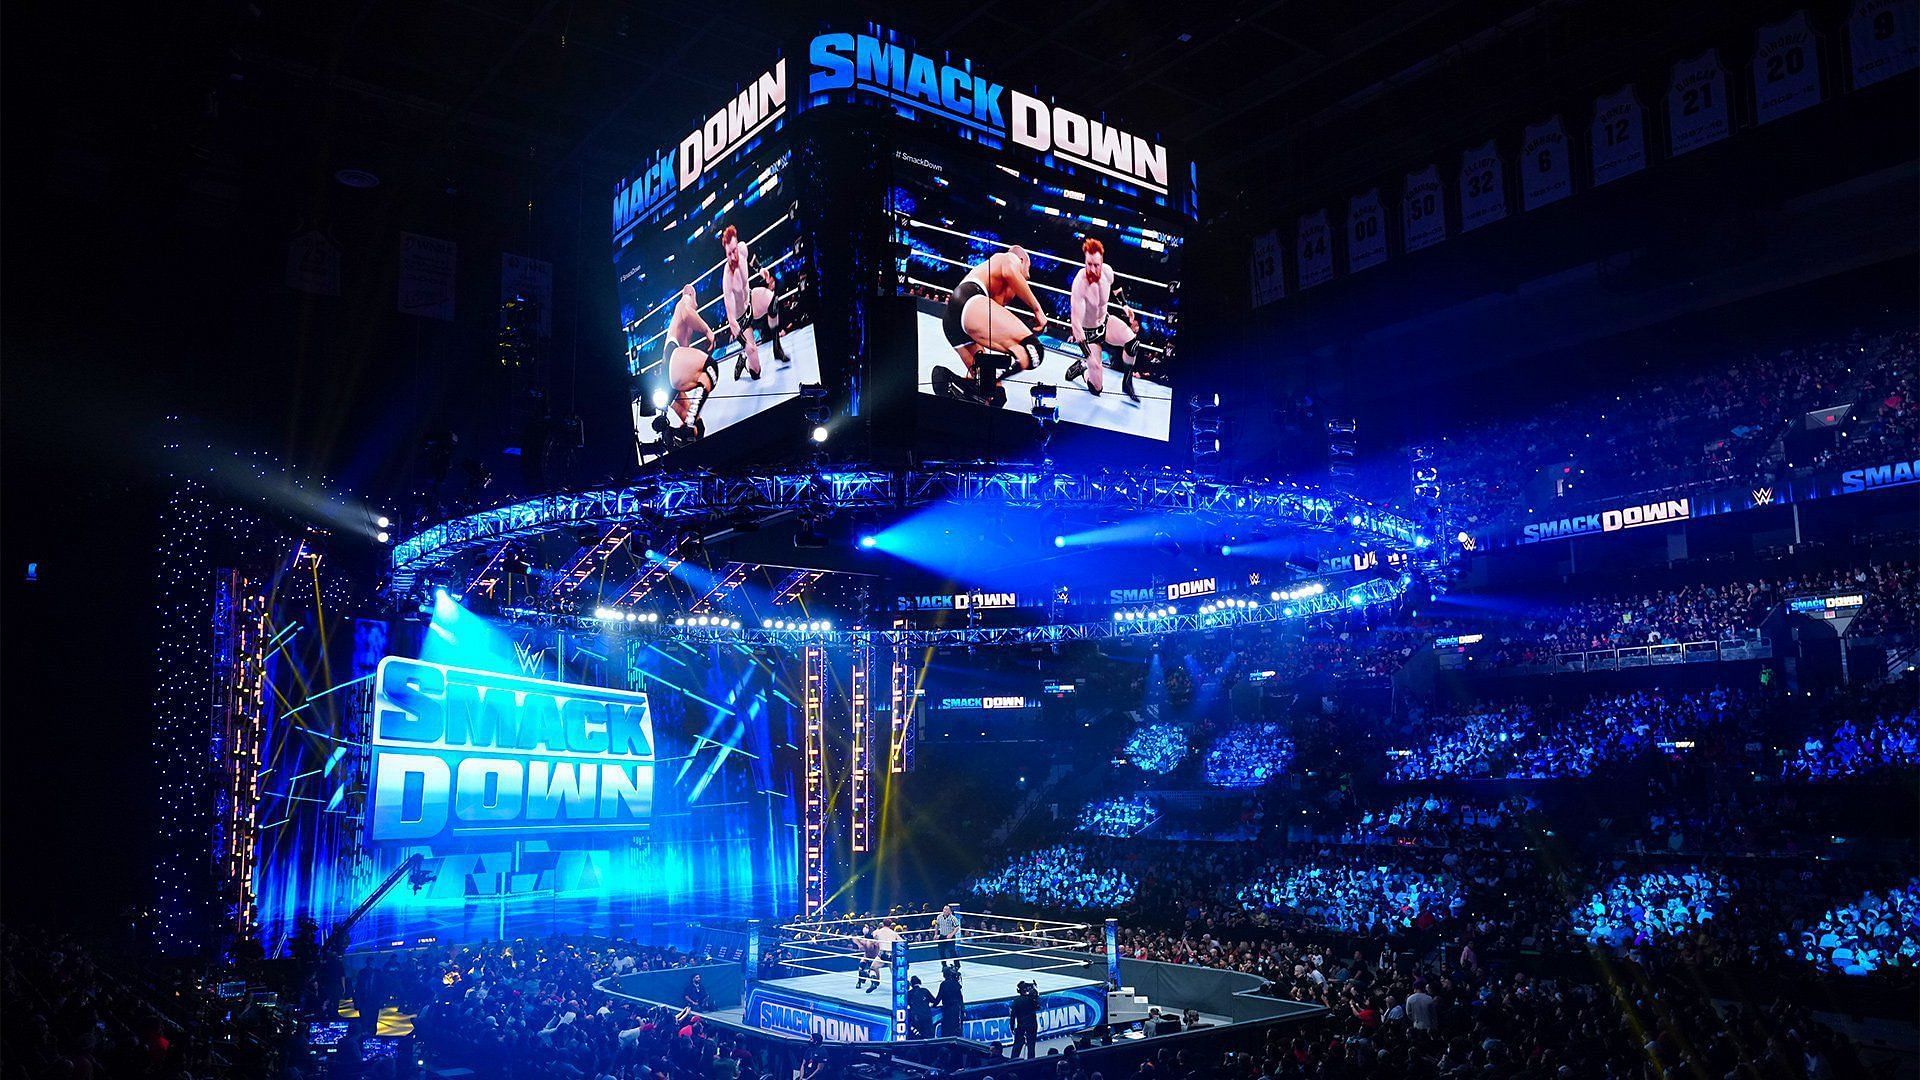 The WWE Universe packs their local arena for a live SmackDown